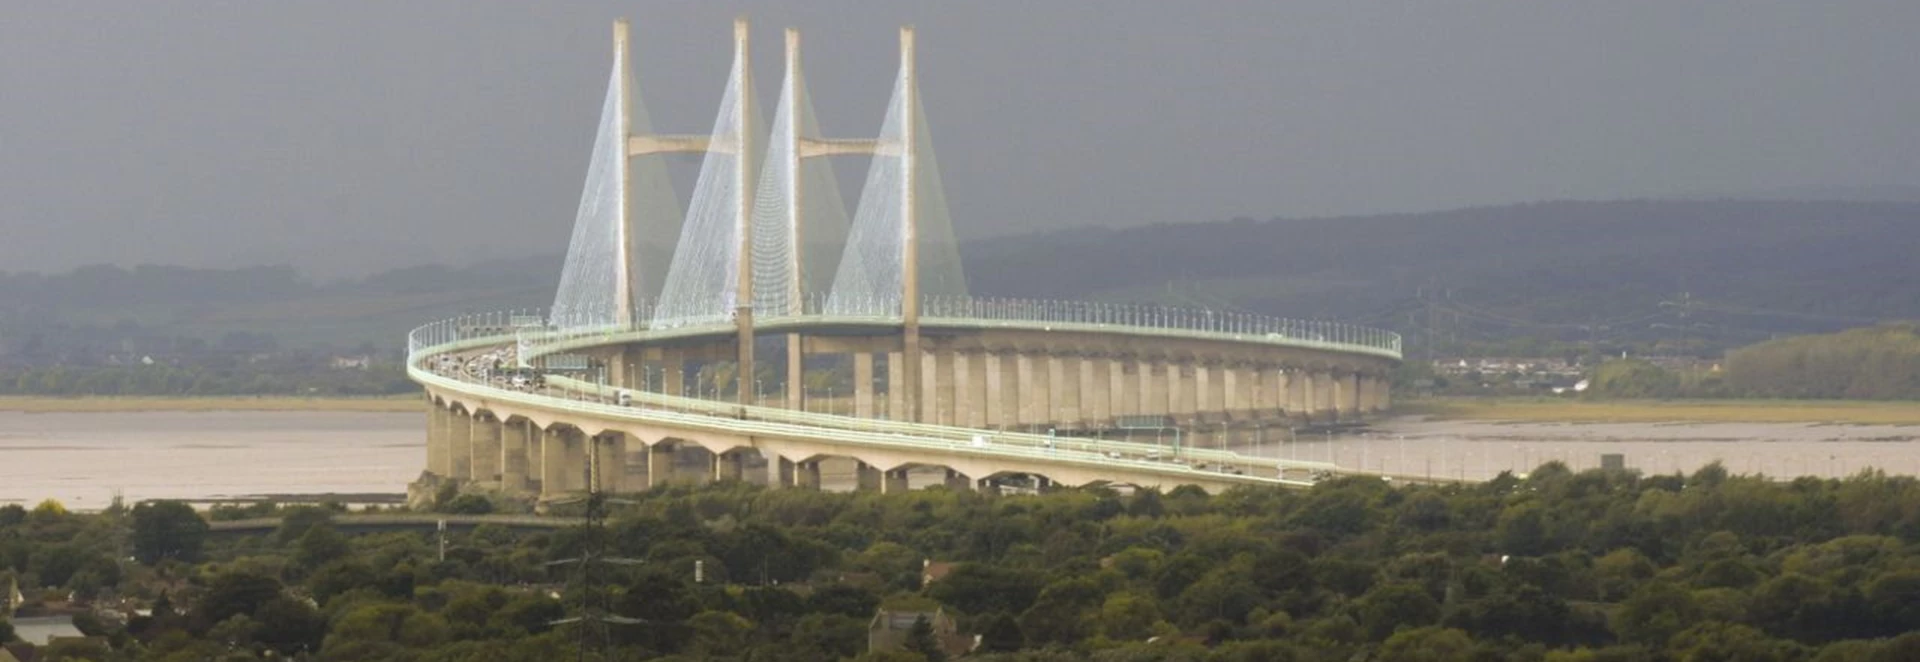 Severn crossing tolls to be abolished by end of 2018 